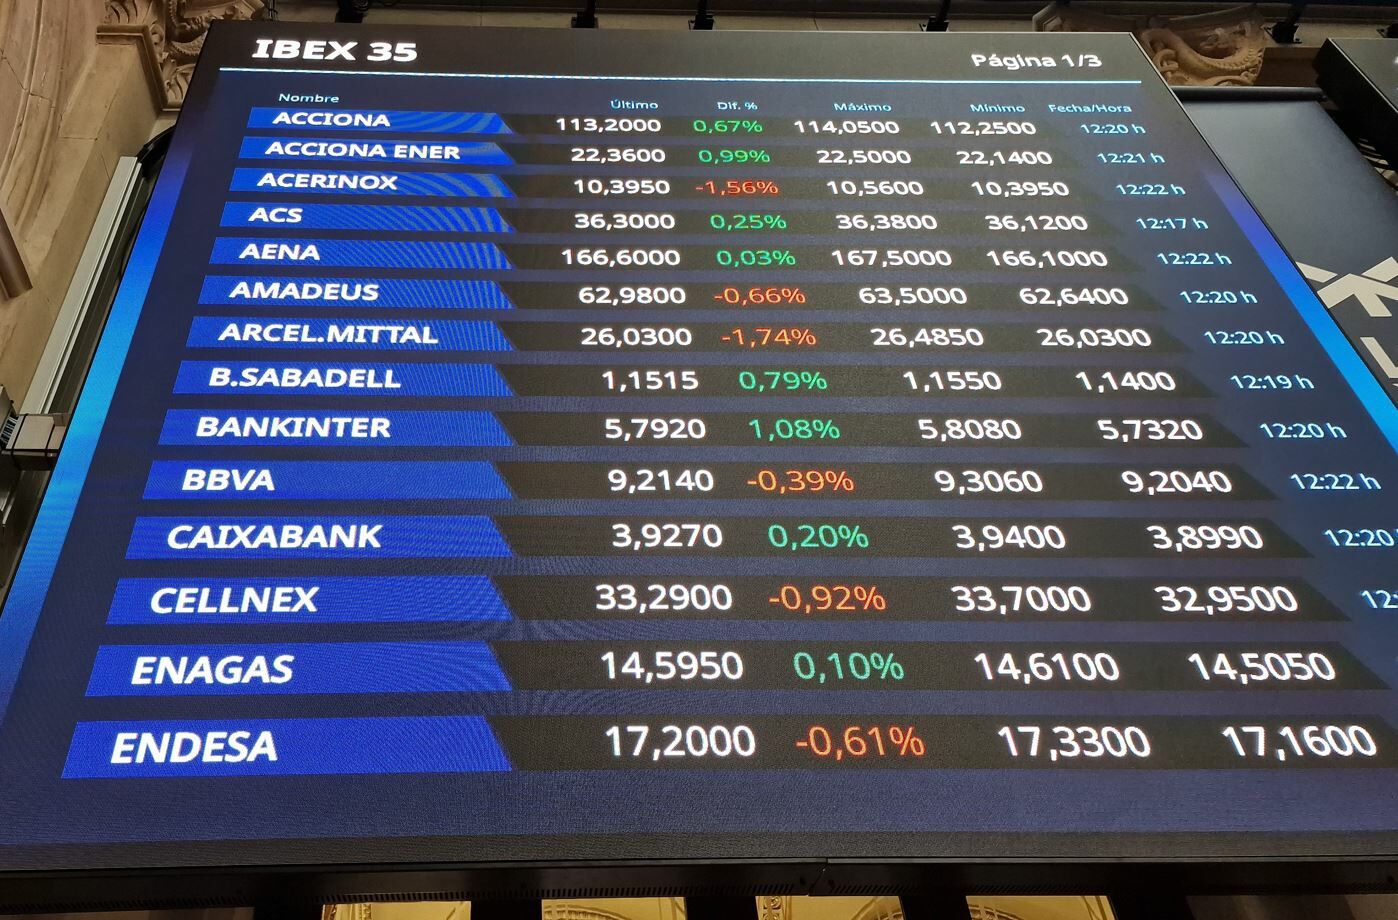 The Ibex 35 index continues to rise above 10,900 points thanks to Inditex.